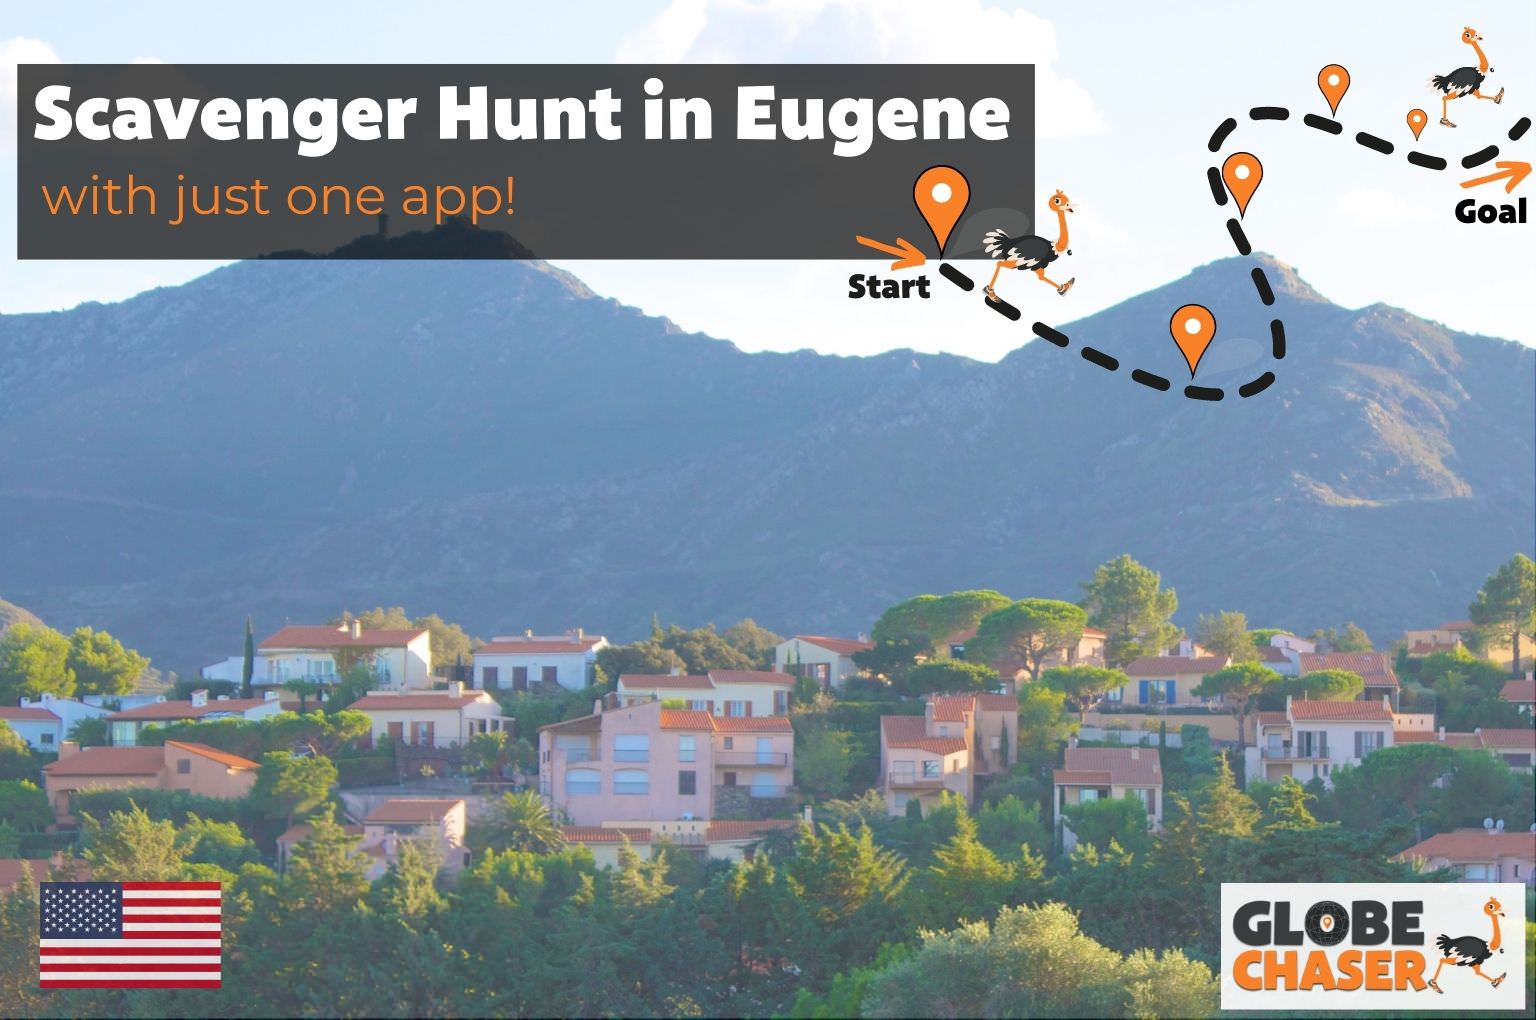 Scavenger Hunt in Eugene, USA - Family Activities with the Globe Chaser App for Outdoor Fun